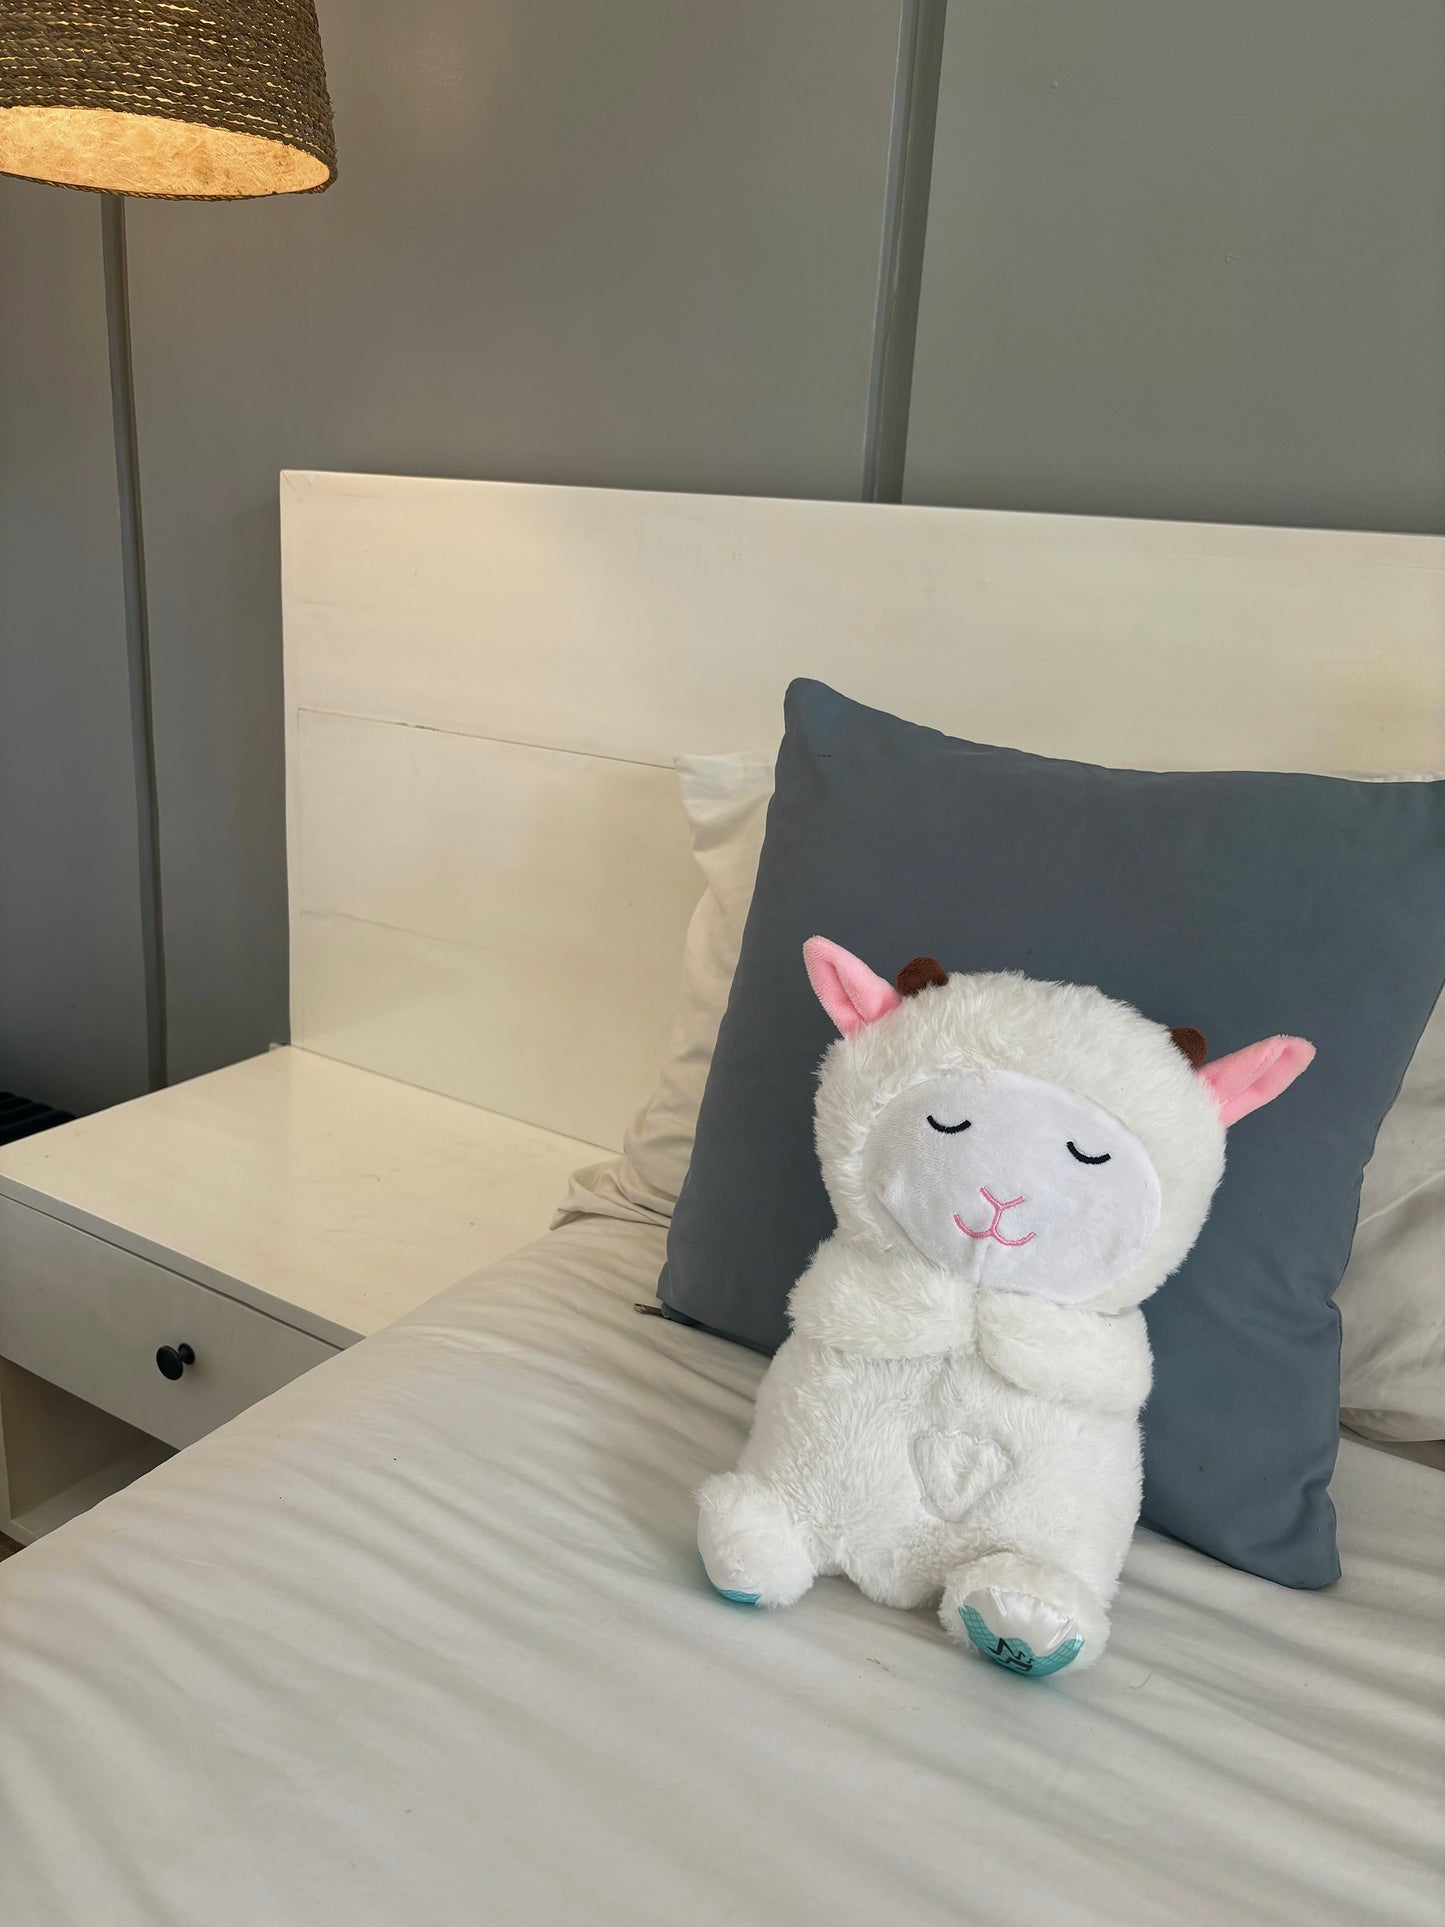 Breathing teddy plush that helps with anxiety and sleep